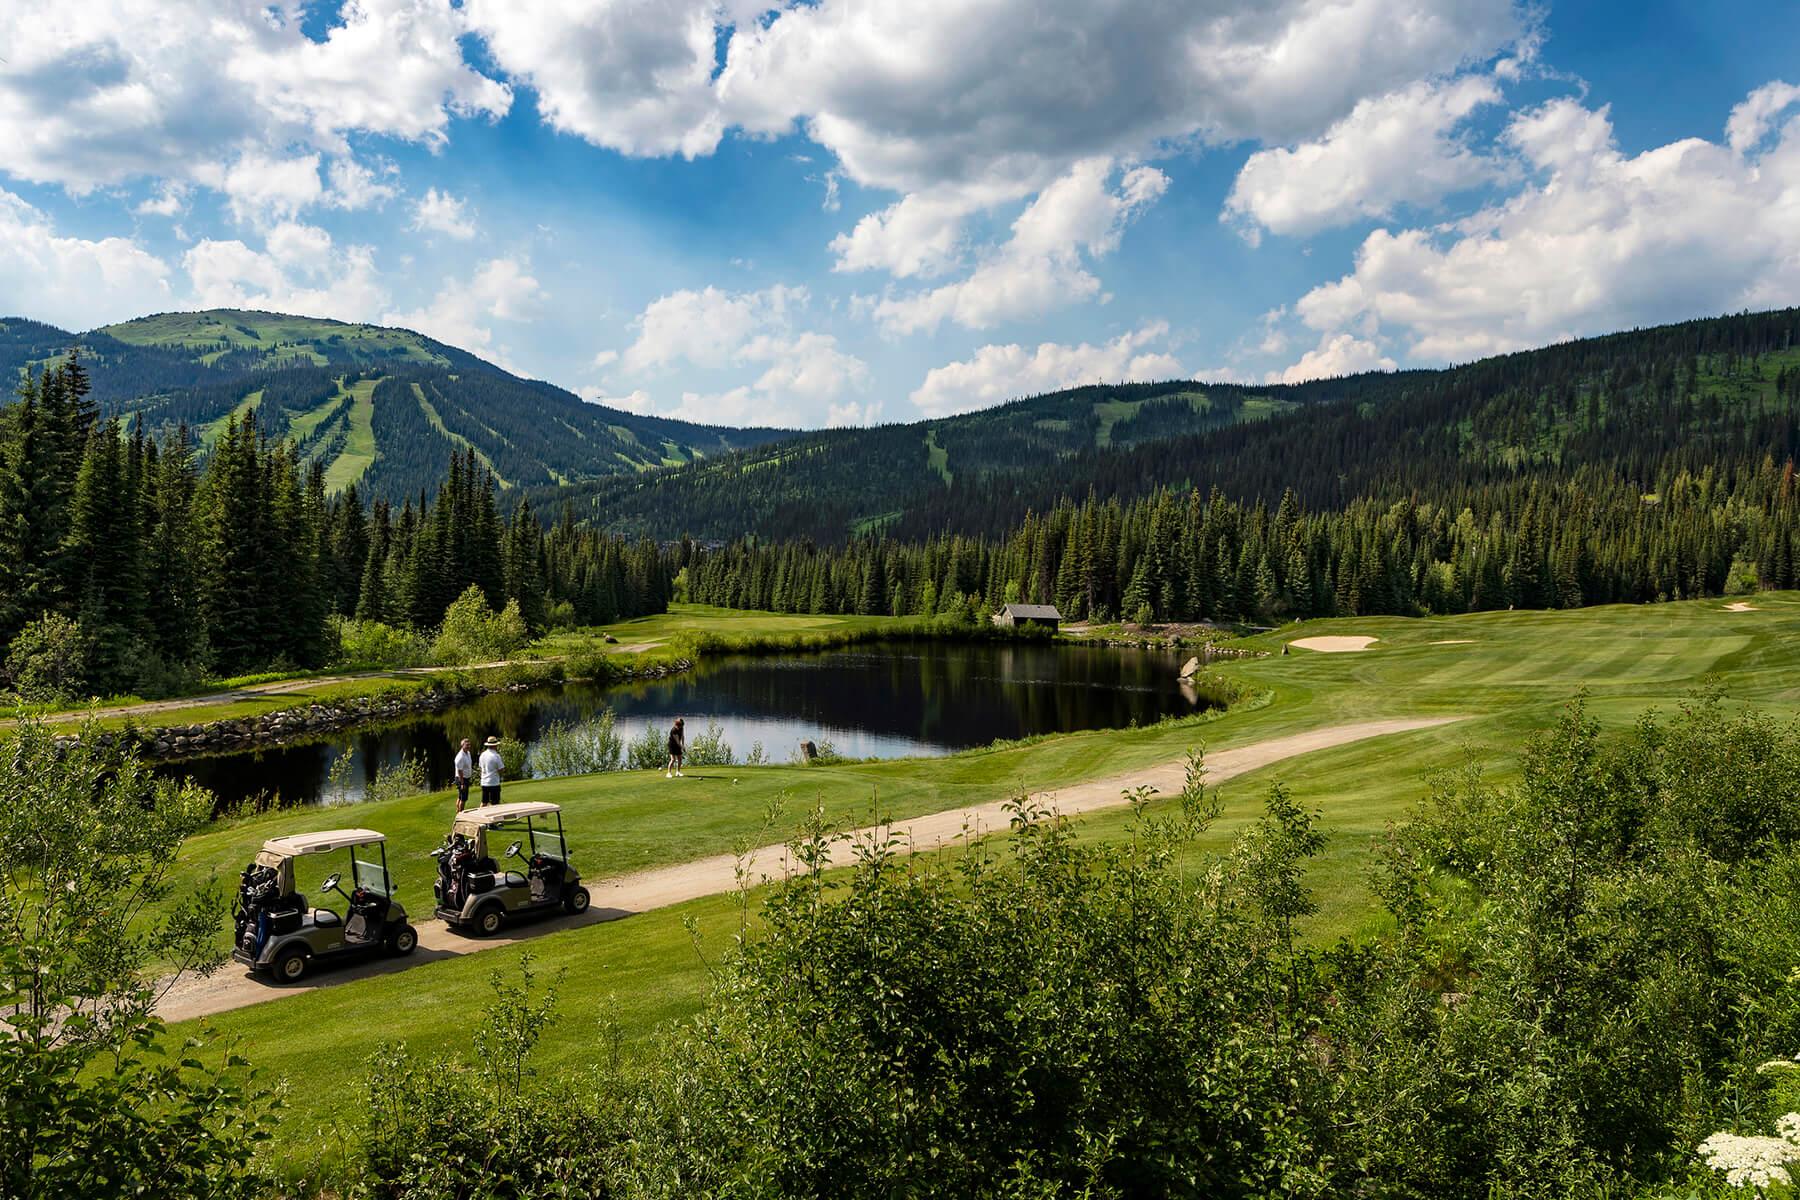 Golfers teeing off on Hole 13 at Sun Peaks Golf Course